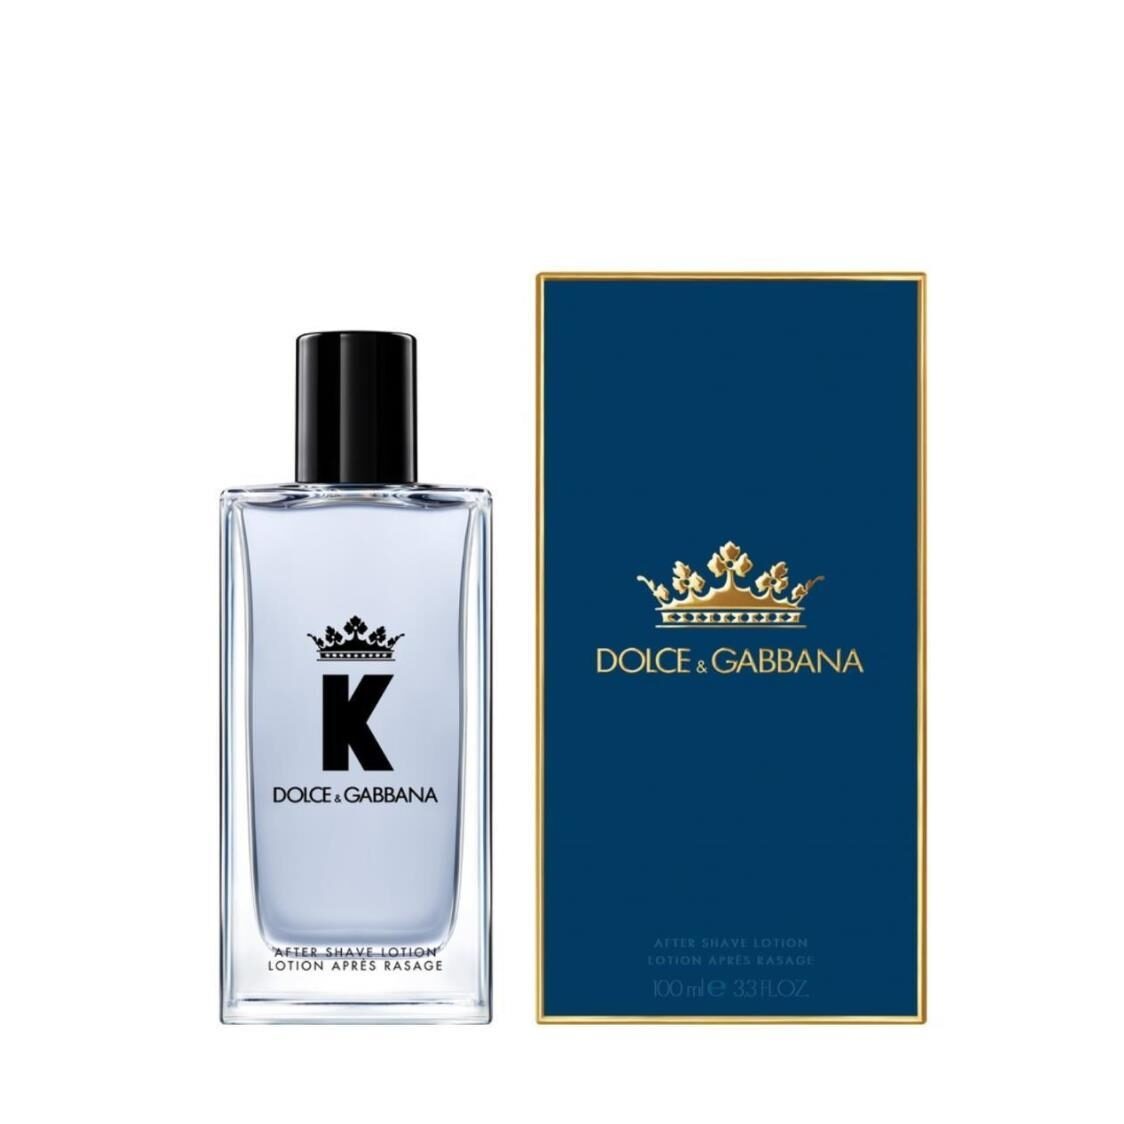 K by DolceGabbana After Shave Lotion 100ml